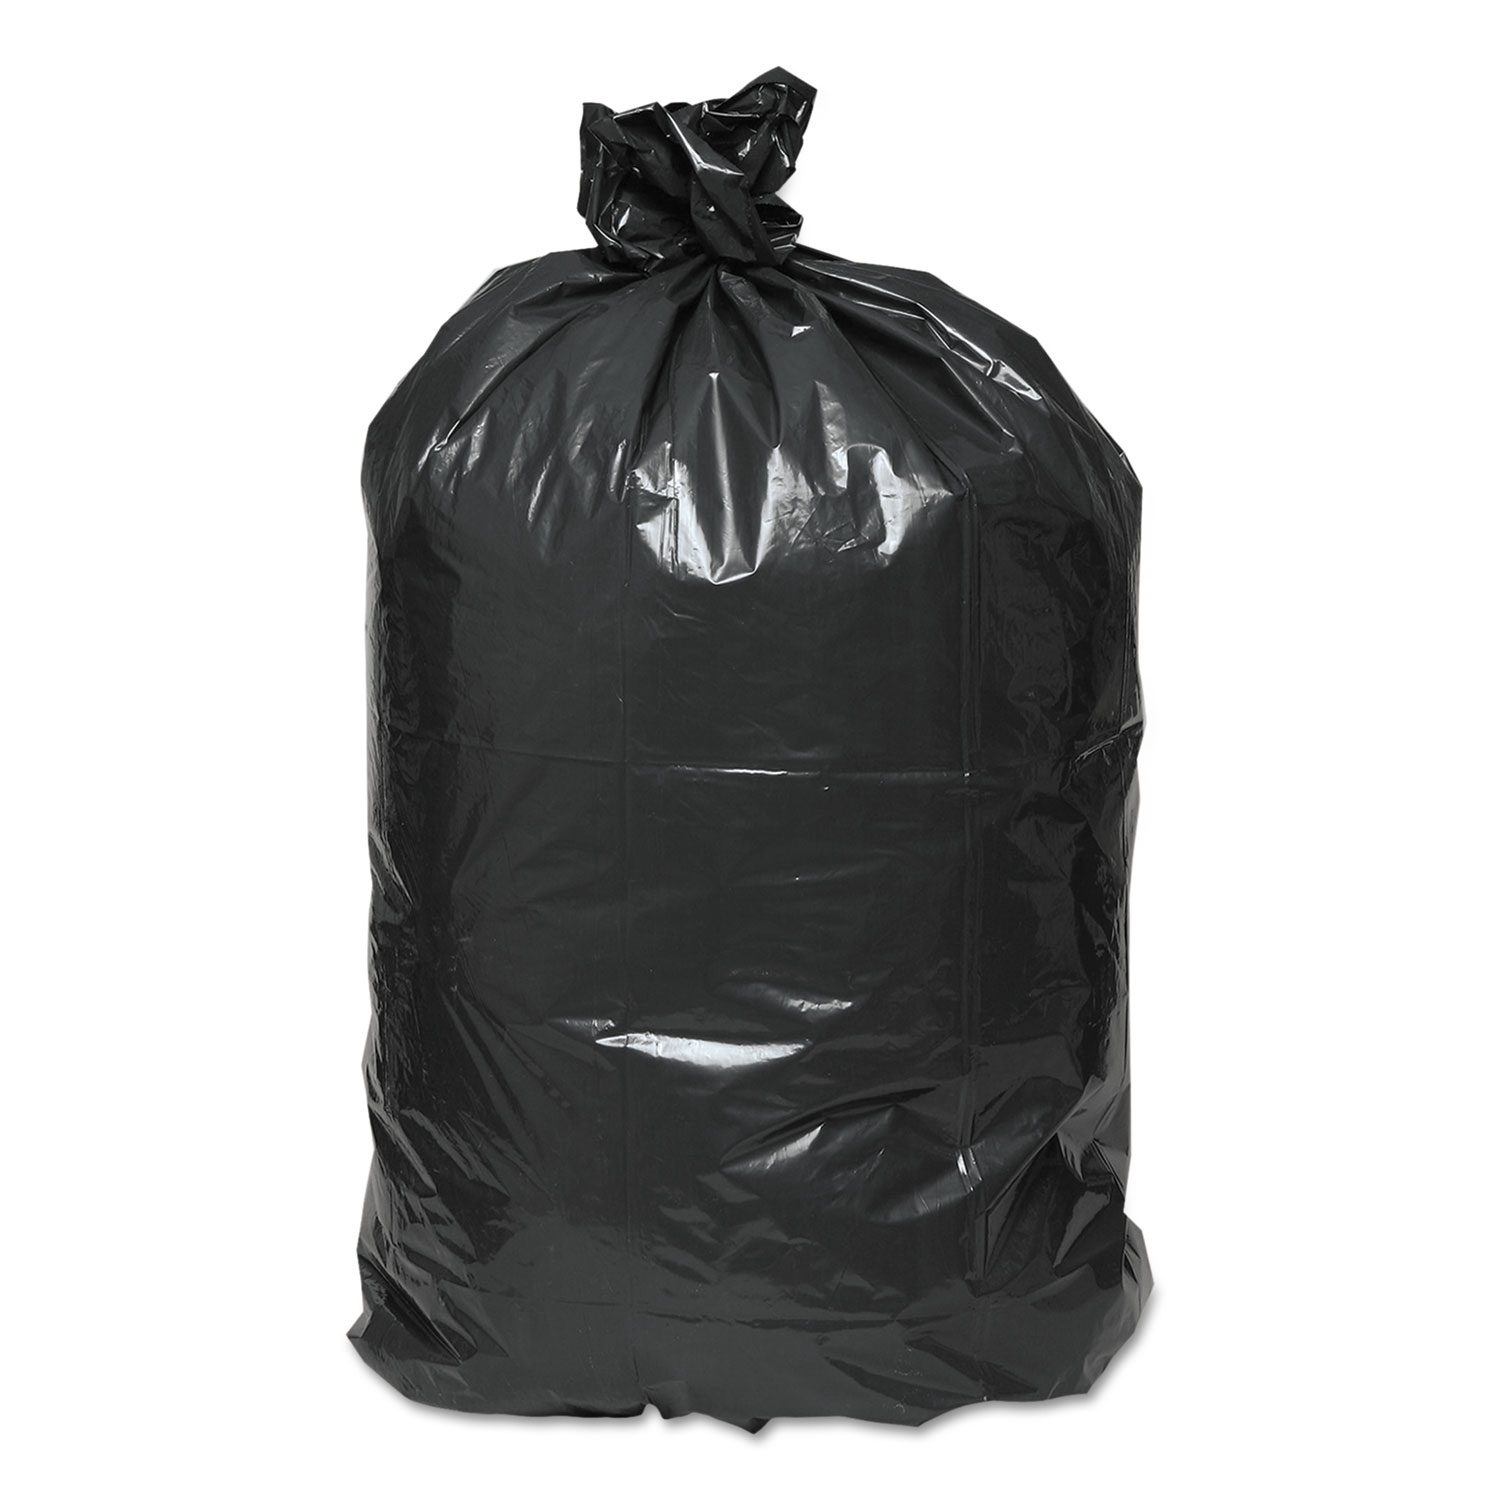 2-Ply Low-Density Can Liners, 56gal, .9 Mil, 43 x 47, Black, 100/Carton